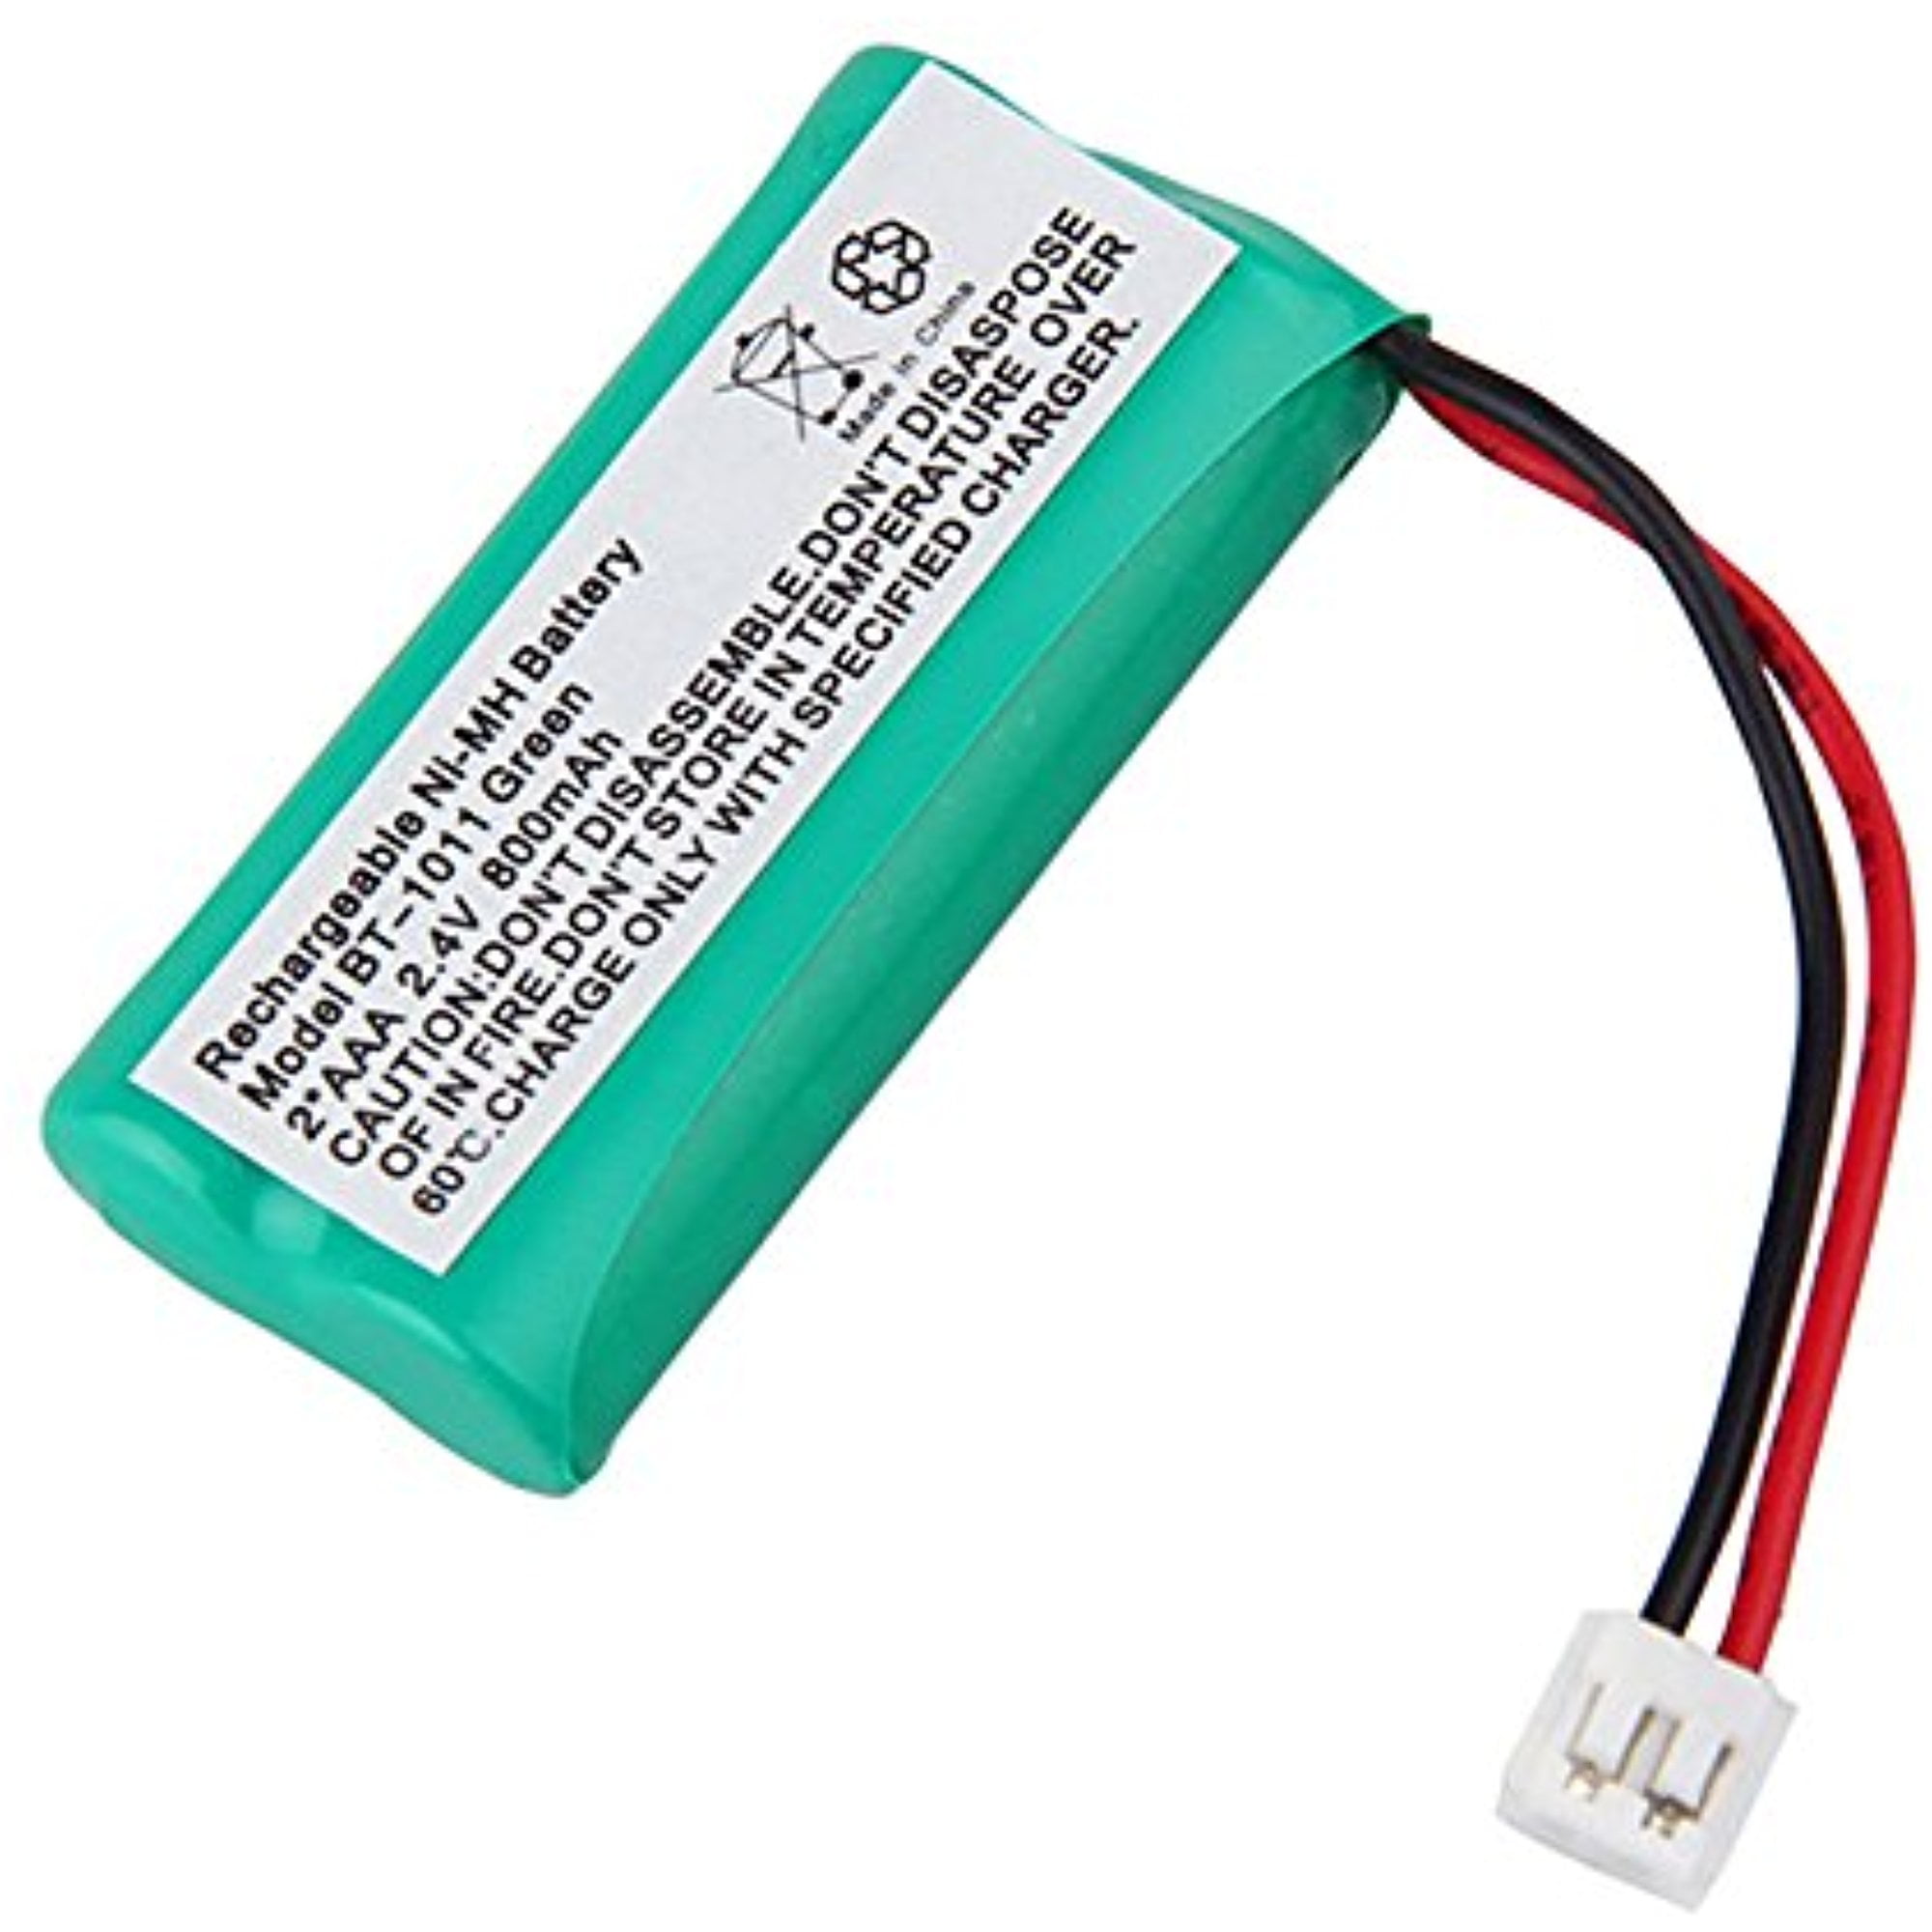 2 Pack Replacement for RCA 25424 Battery Compatible with RCA Cordless Phone Battery 700mAh 2.4V NI-MH